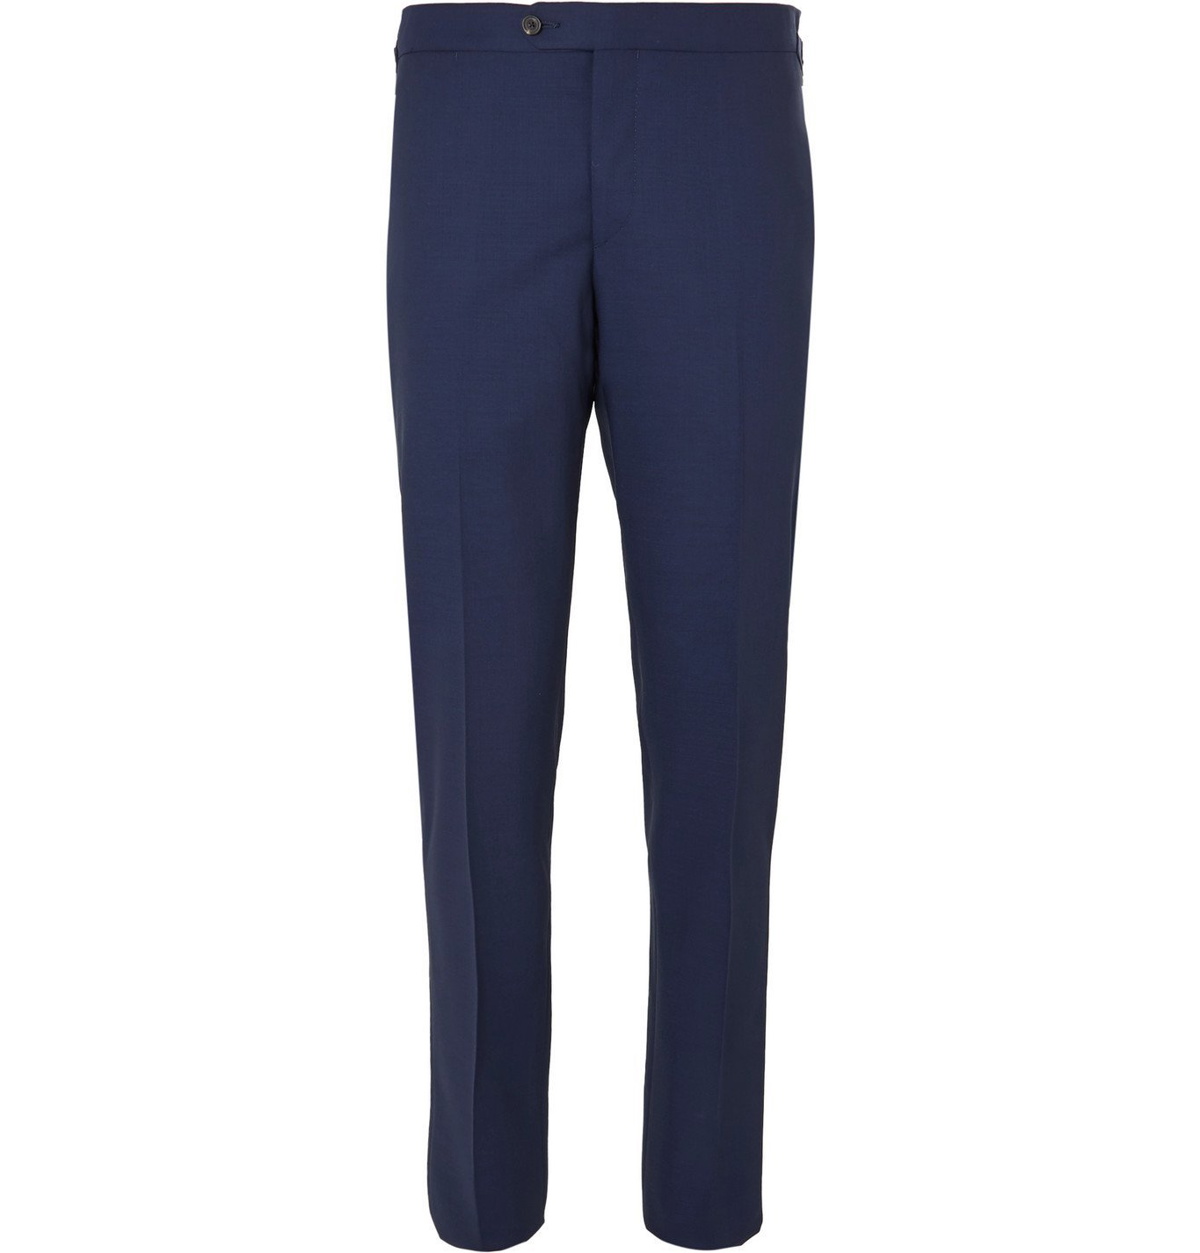 Thom Sweeney - Slim-Fit Tapered Wool Suit Trousers - Blue Thom Sweeney